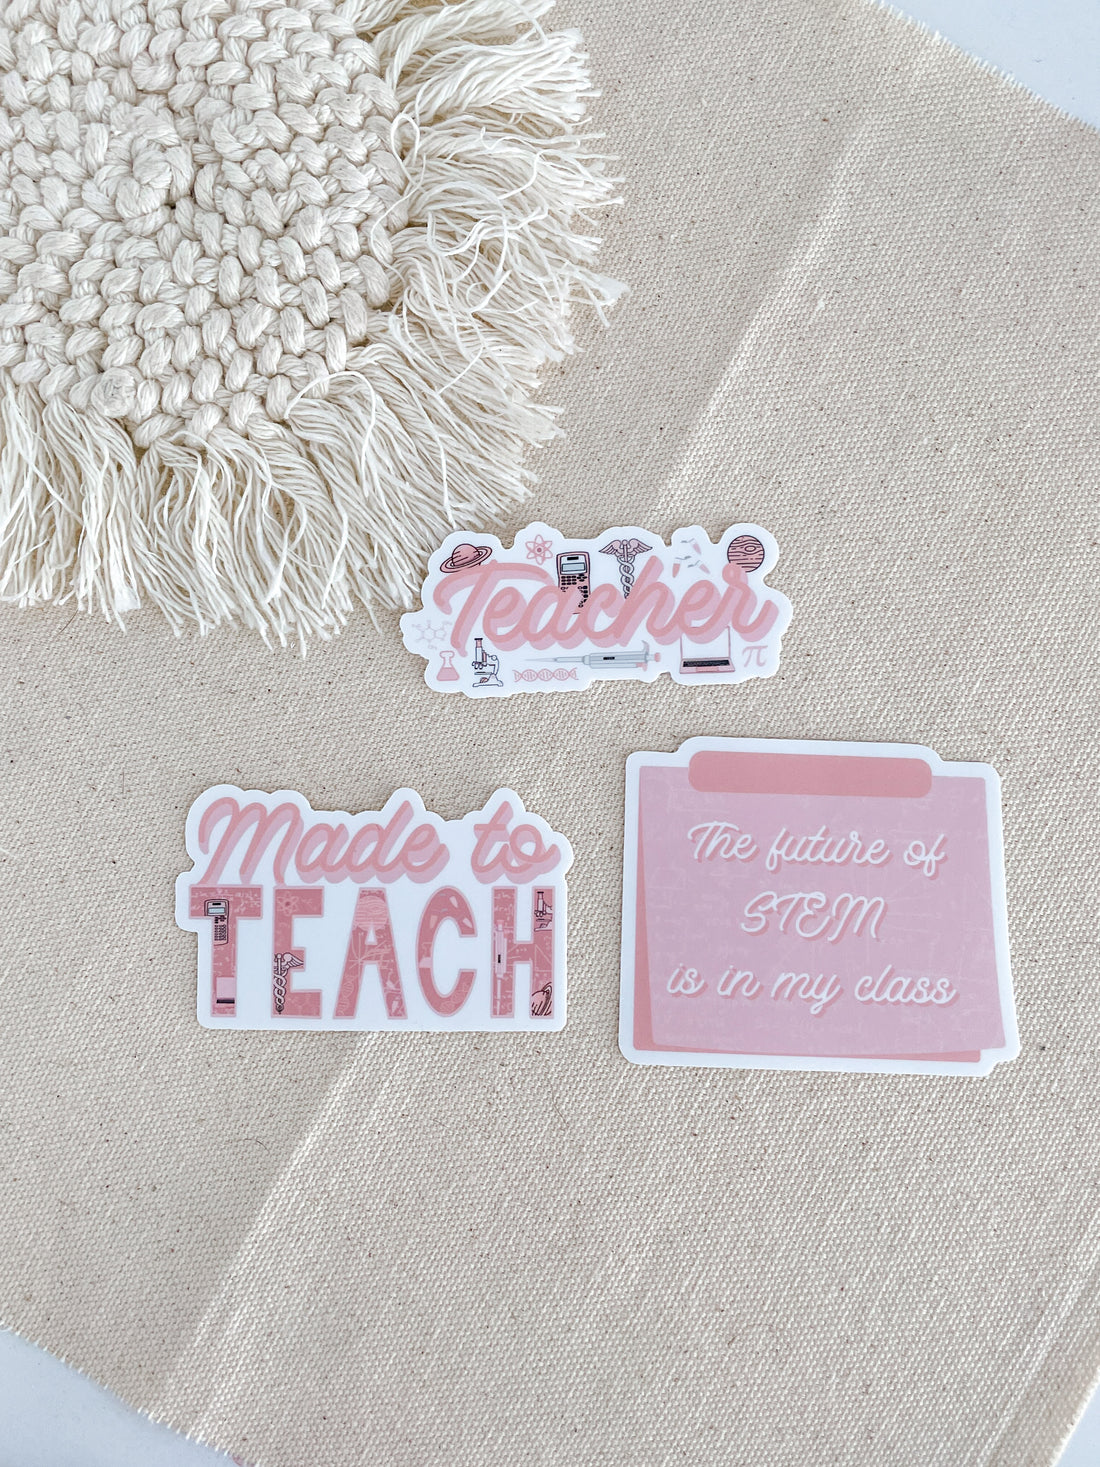 This sticker pack includes the STEM Teacher sticker, the 'future of STEM' sticker, and the 'made to teach' sticker. These stickers are perfect for anyone who loves engineering and science! They can be easily placed on laptops, iPads, journals, water bottles, and many other surfaces.